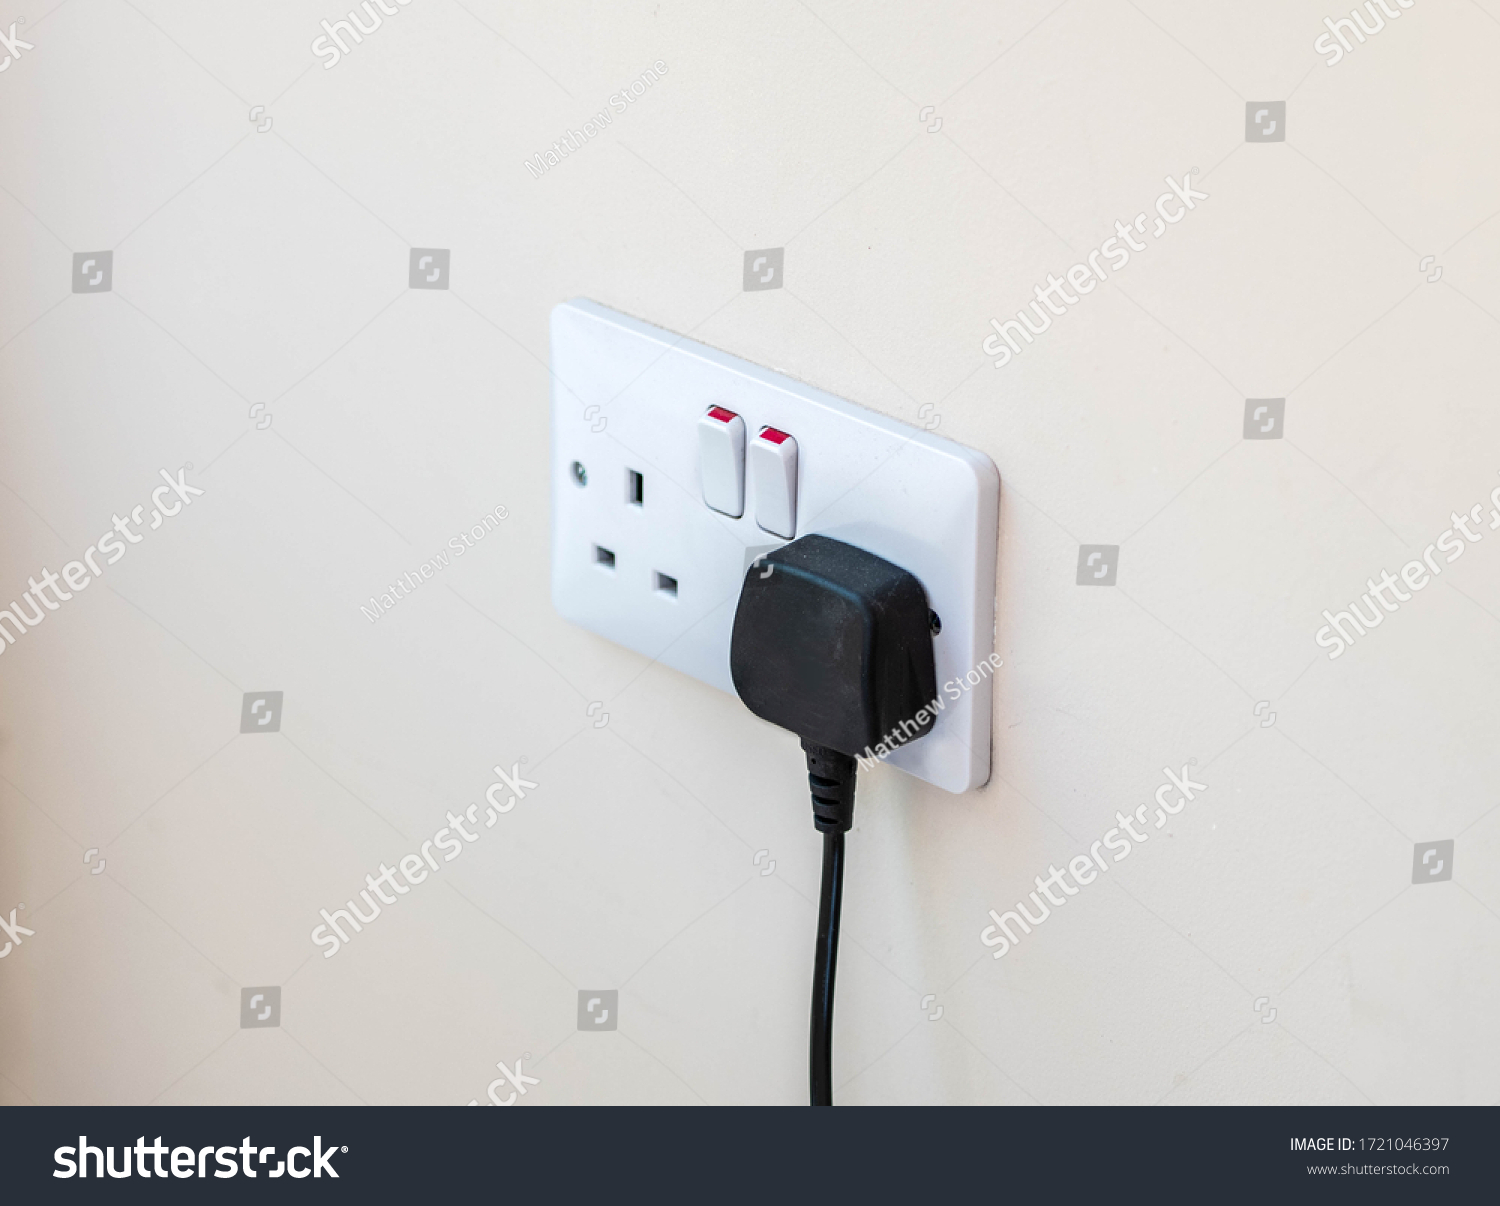 Uk plug socket with a black plug plugged in wasting electricity  #1721046397